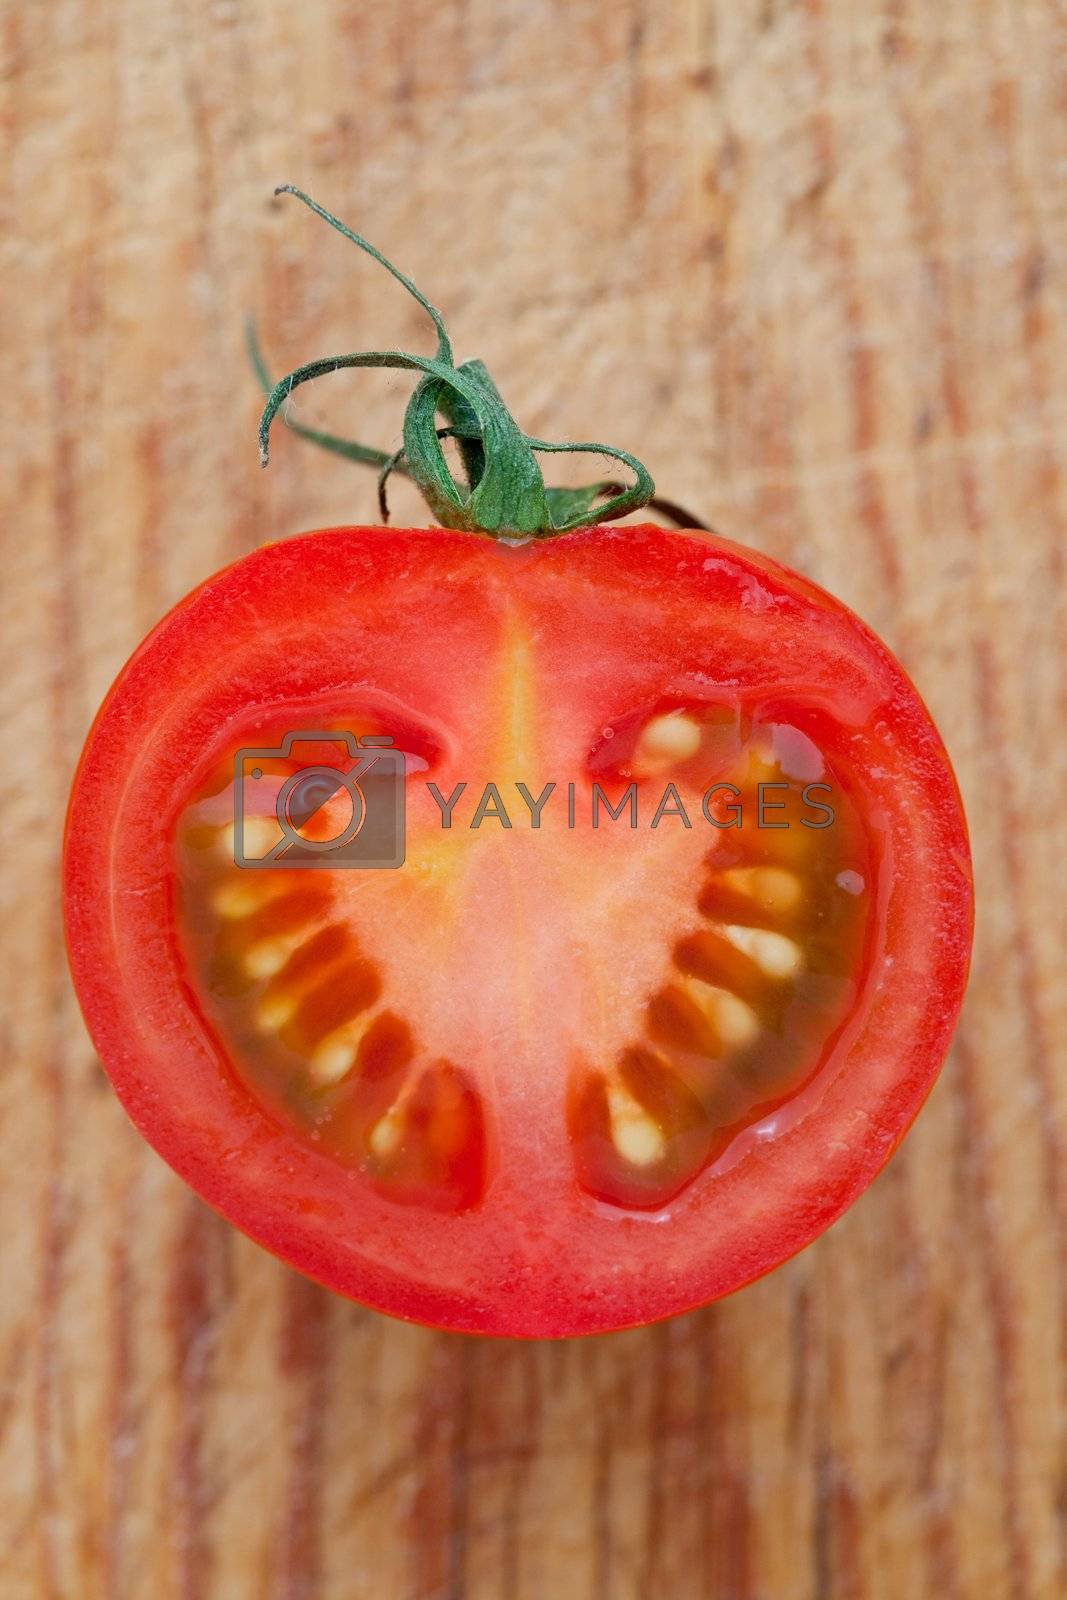 Royalty free image of Half a fresh tomato by raphotography